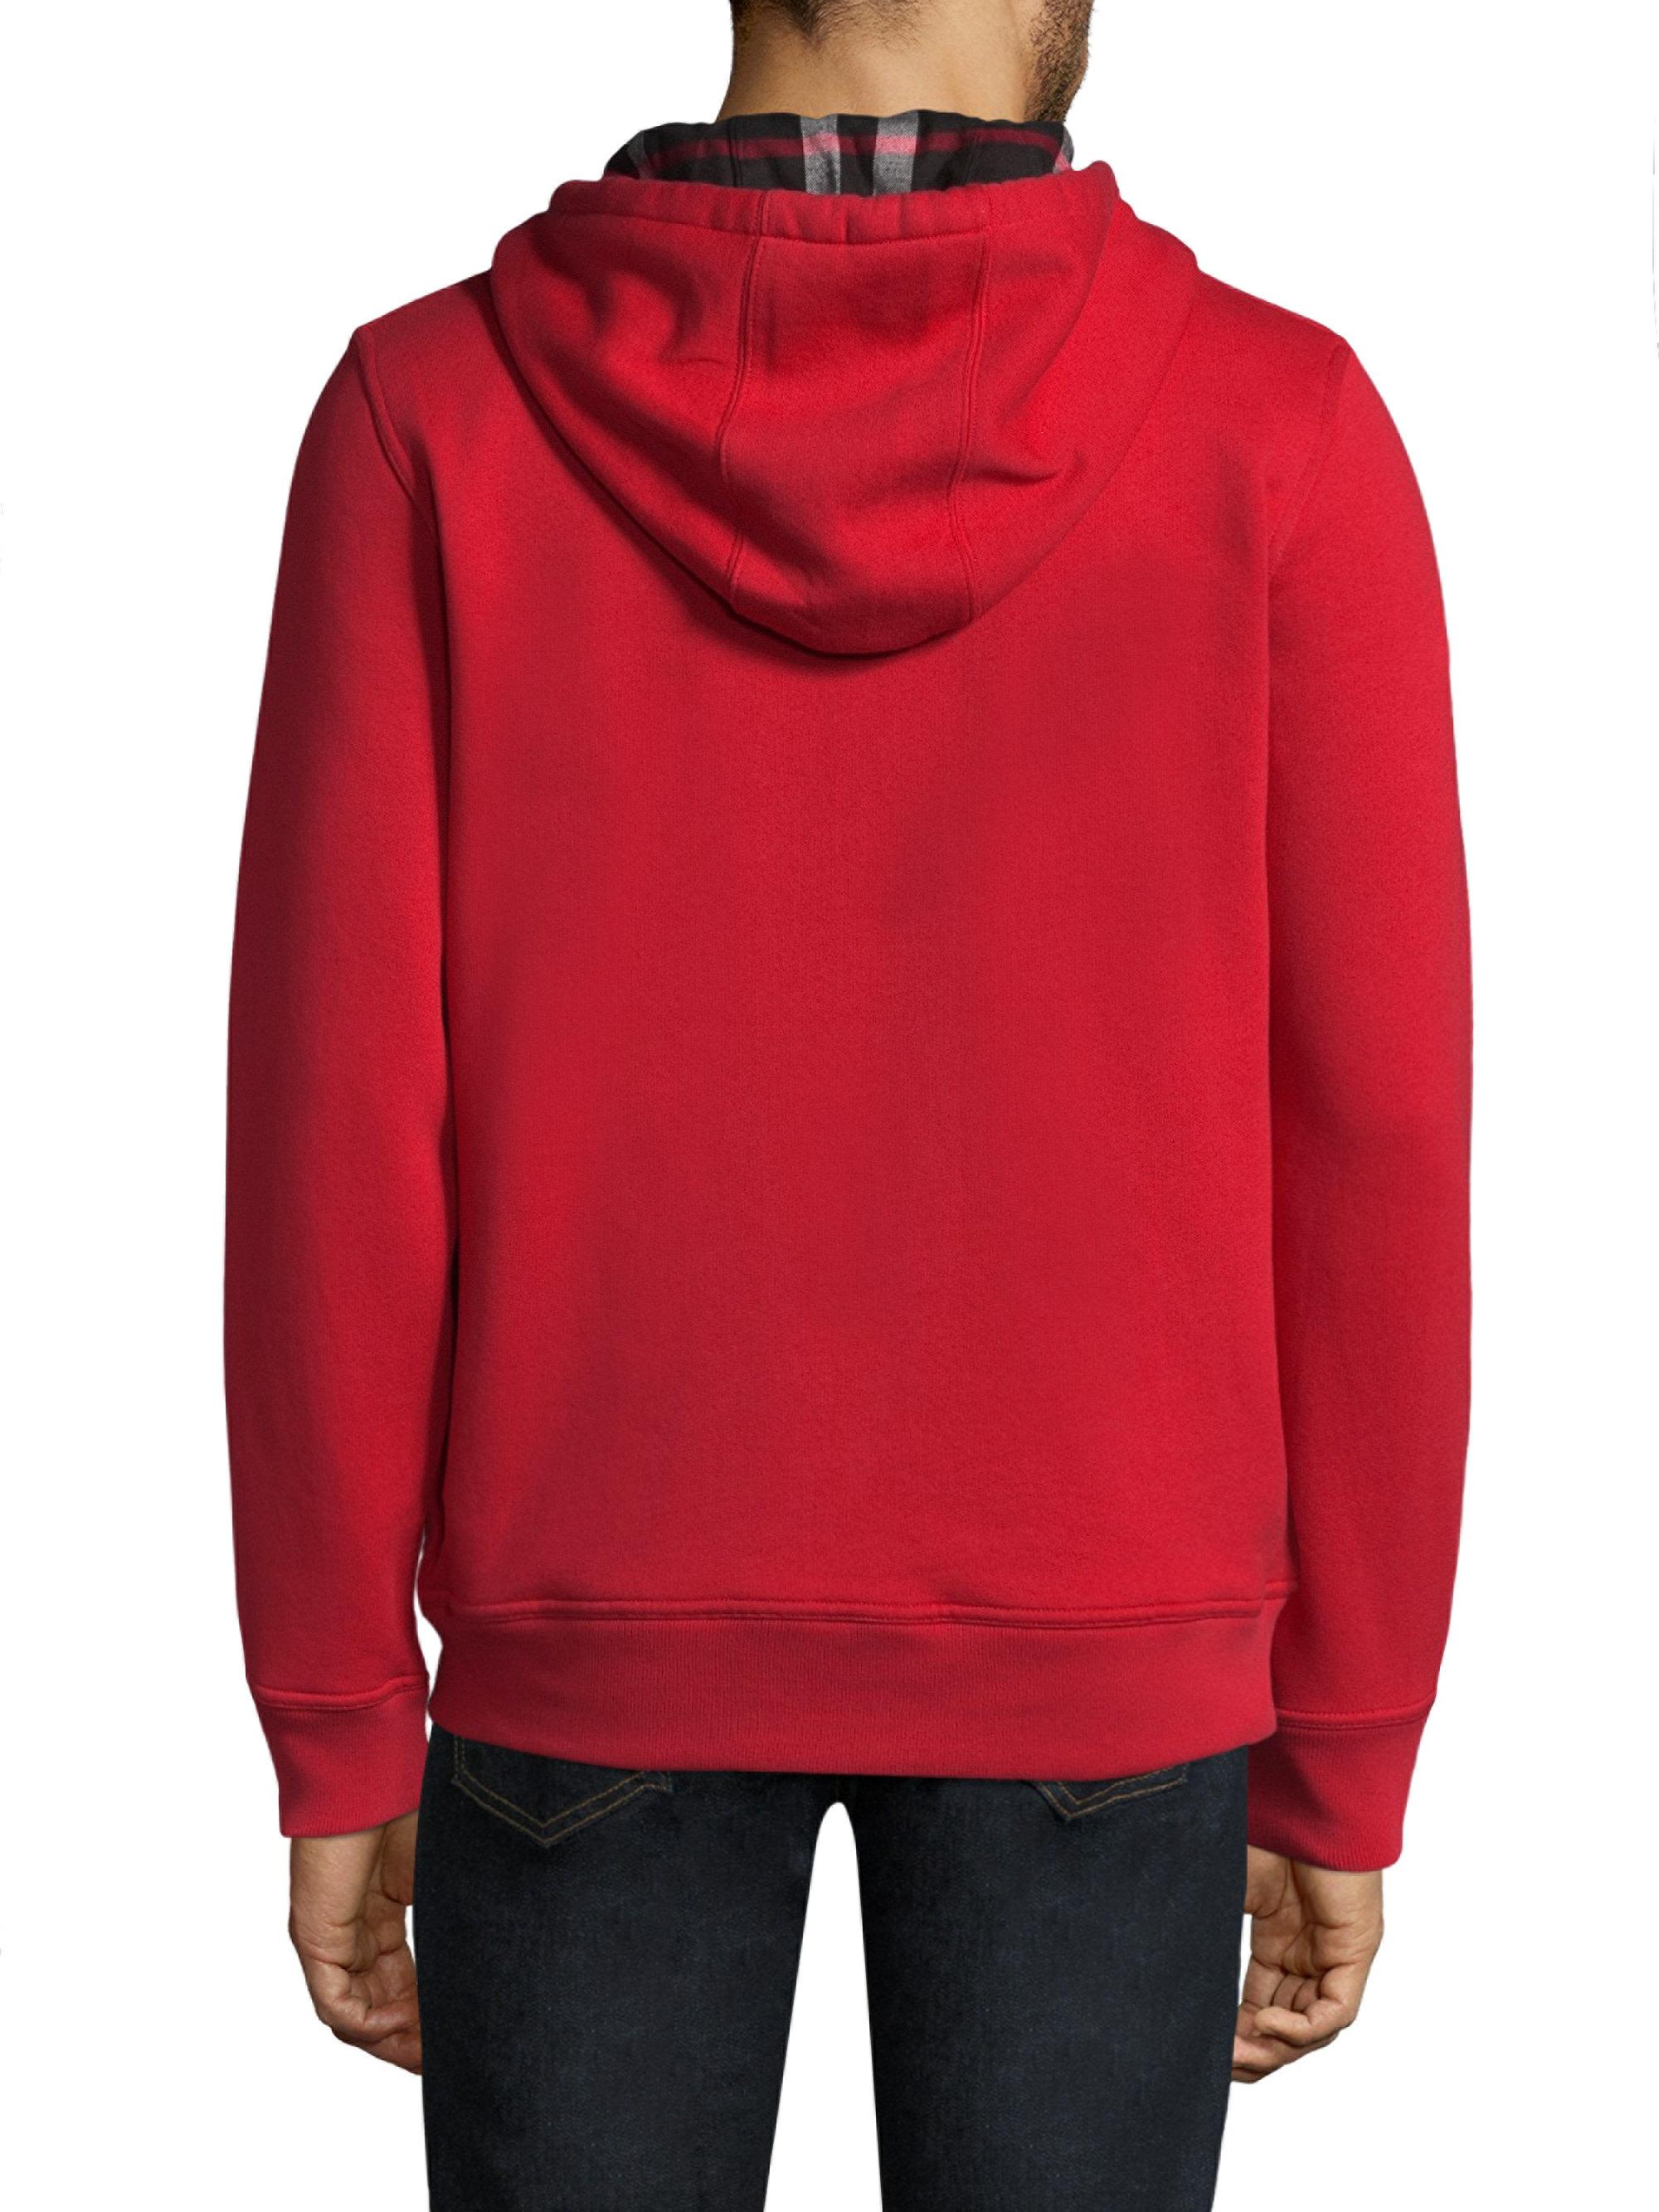 Burberry Fordsoncore Zip Up Hoodie in Red for Men - Lyst